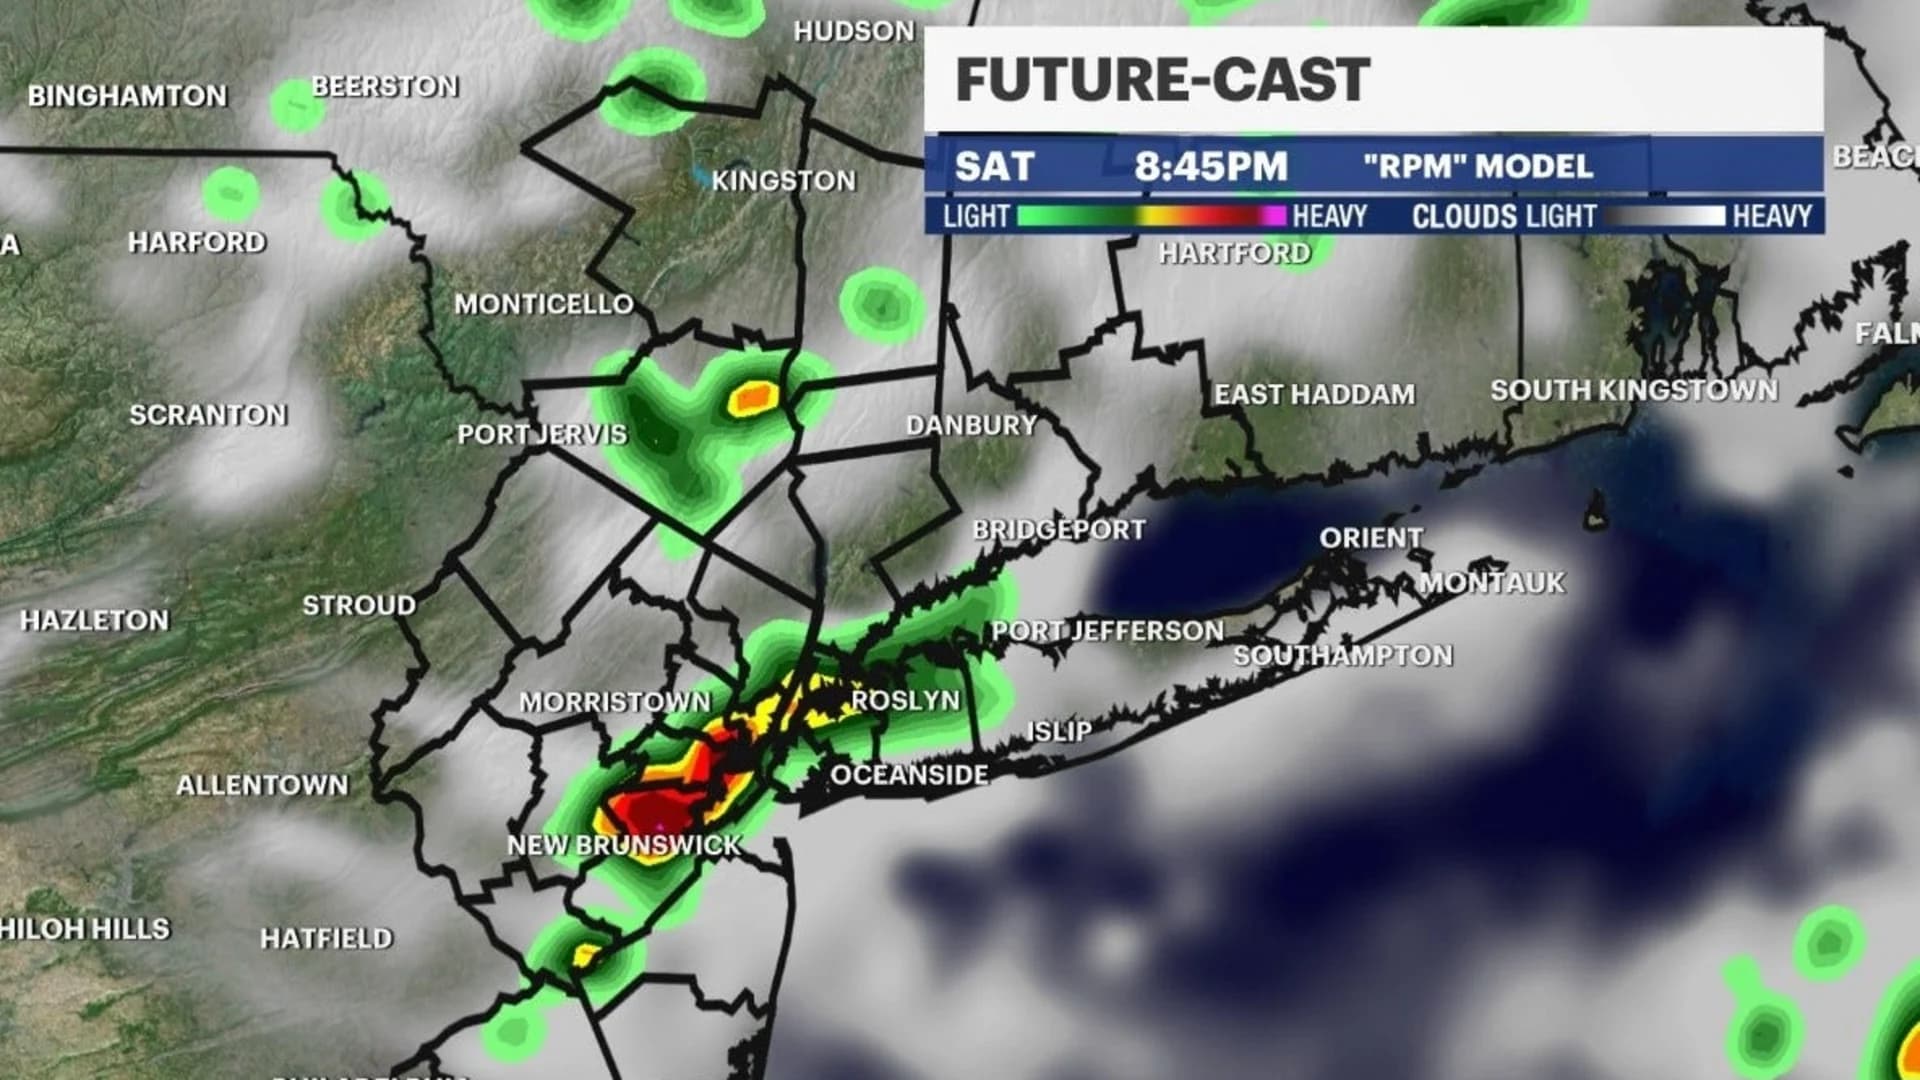 Remnants of Laura bring periods of rain, chance of storms into the evening